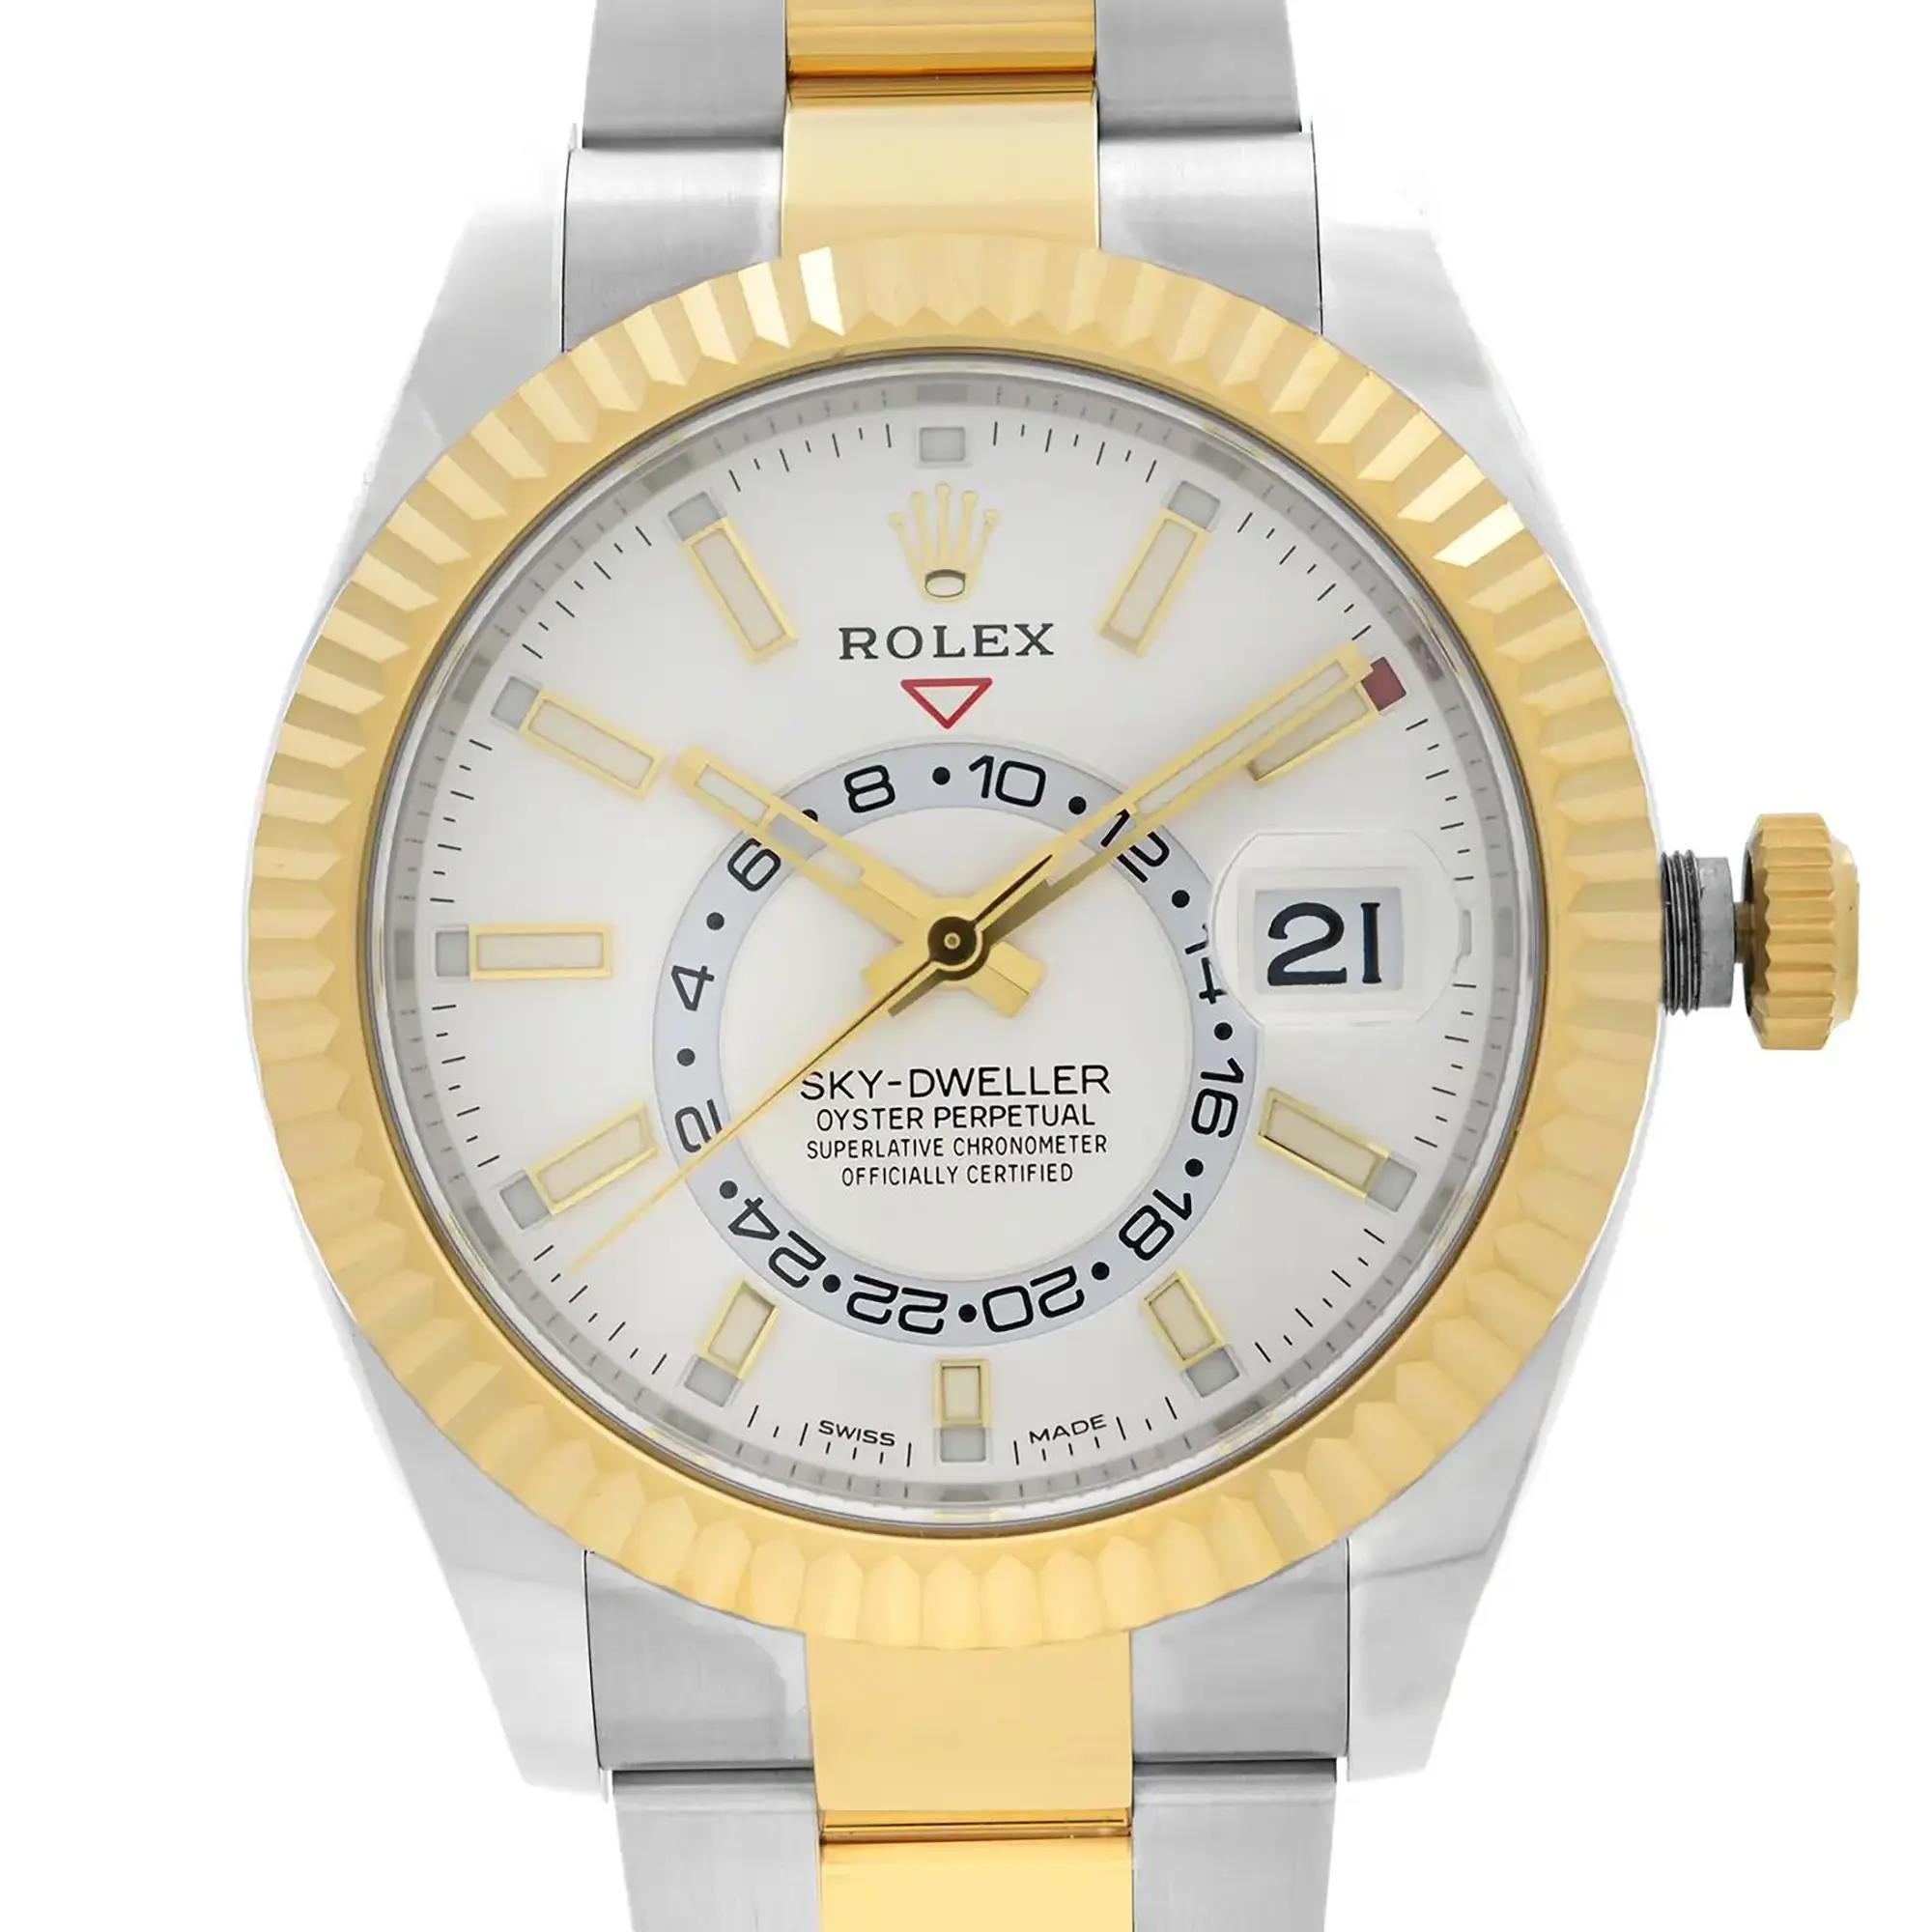 Pre-owned. Excellent Condition. 2022 Card. 


Brand and Model Information:
Brand: Rolex
Model: Rolex Sky-Dweller 326933
Model Number: 326933

Type and Style:
Type: Wristwatch
Department: Men
Display: Analog
Vintage: No
Year Manufactured: